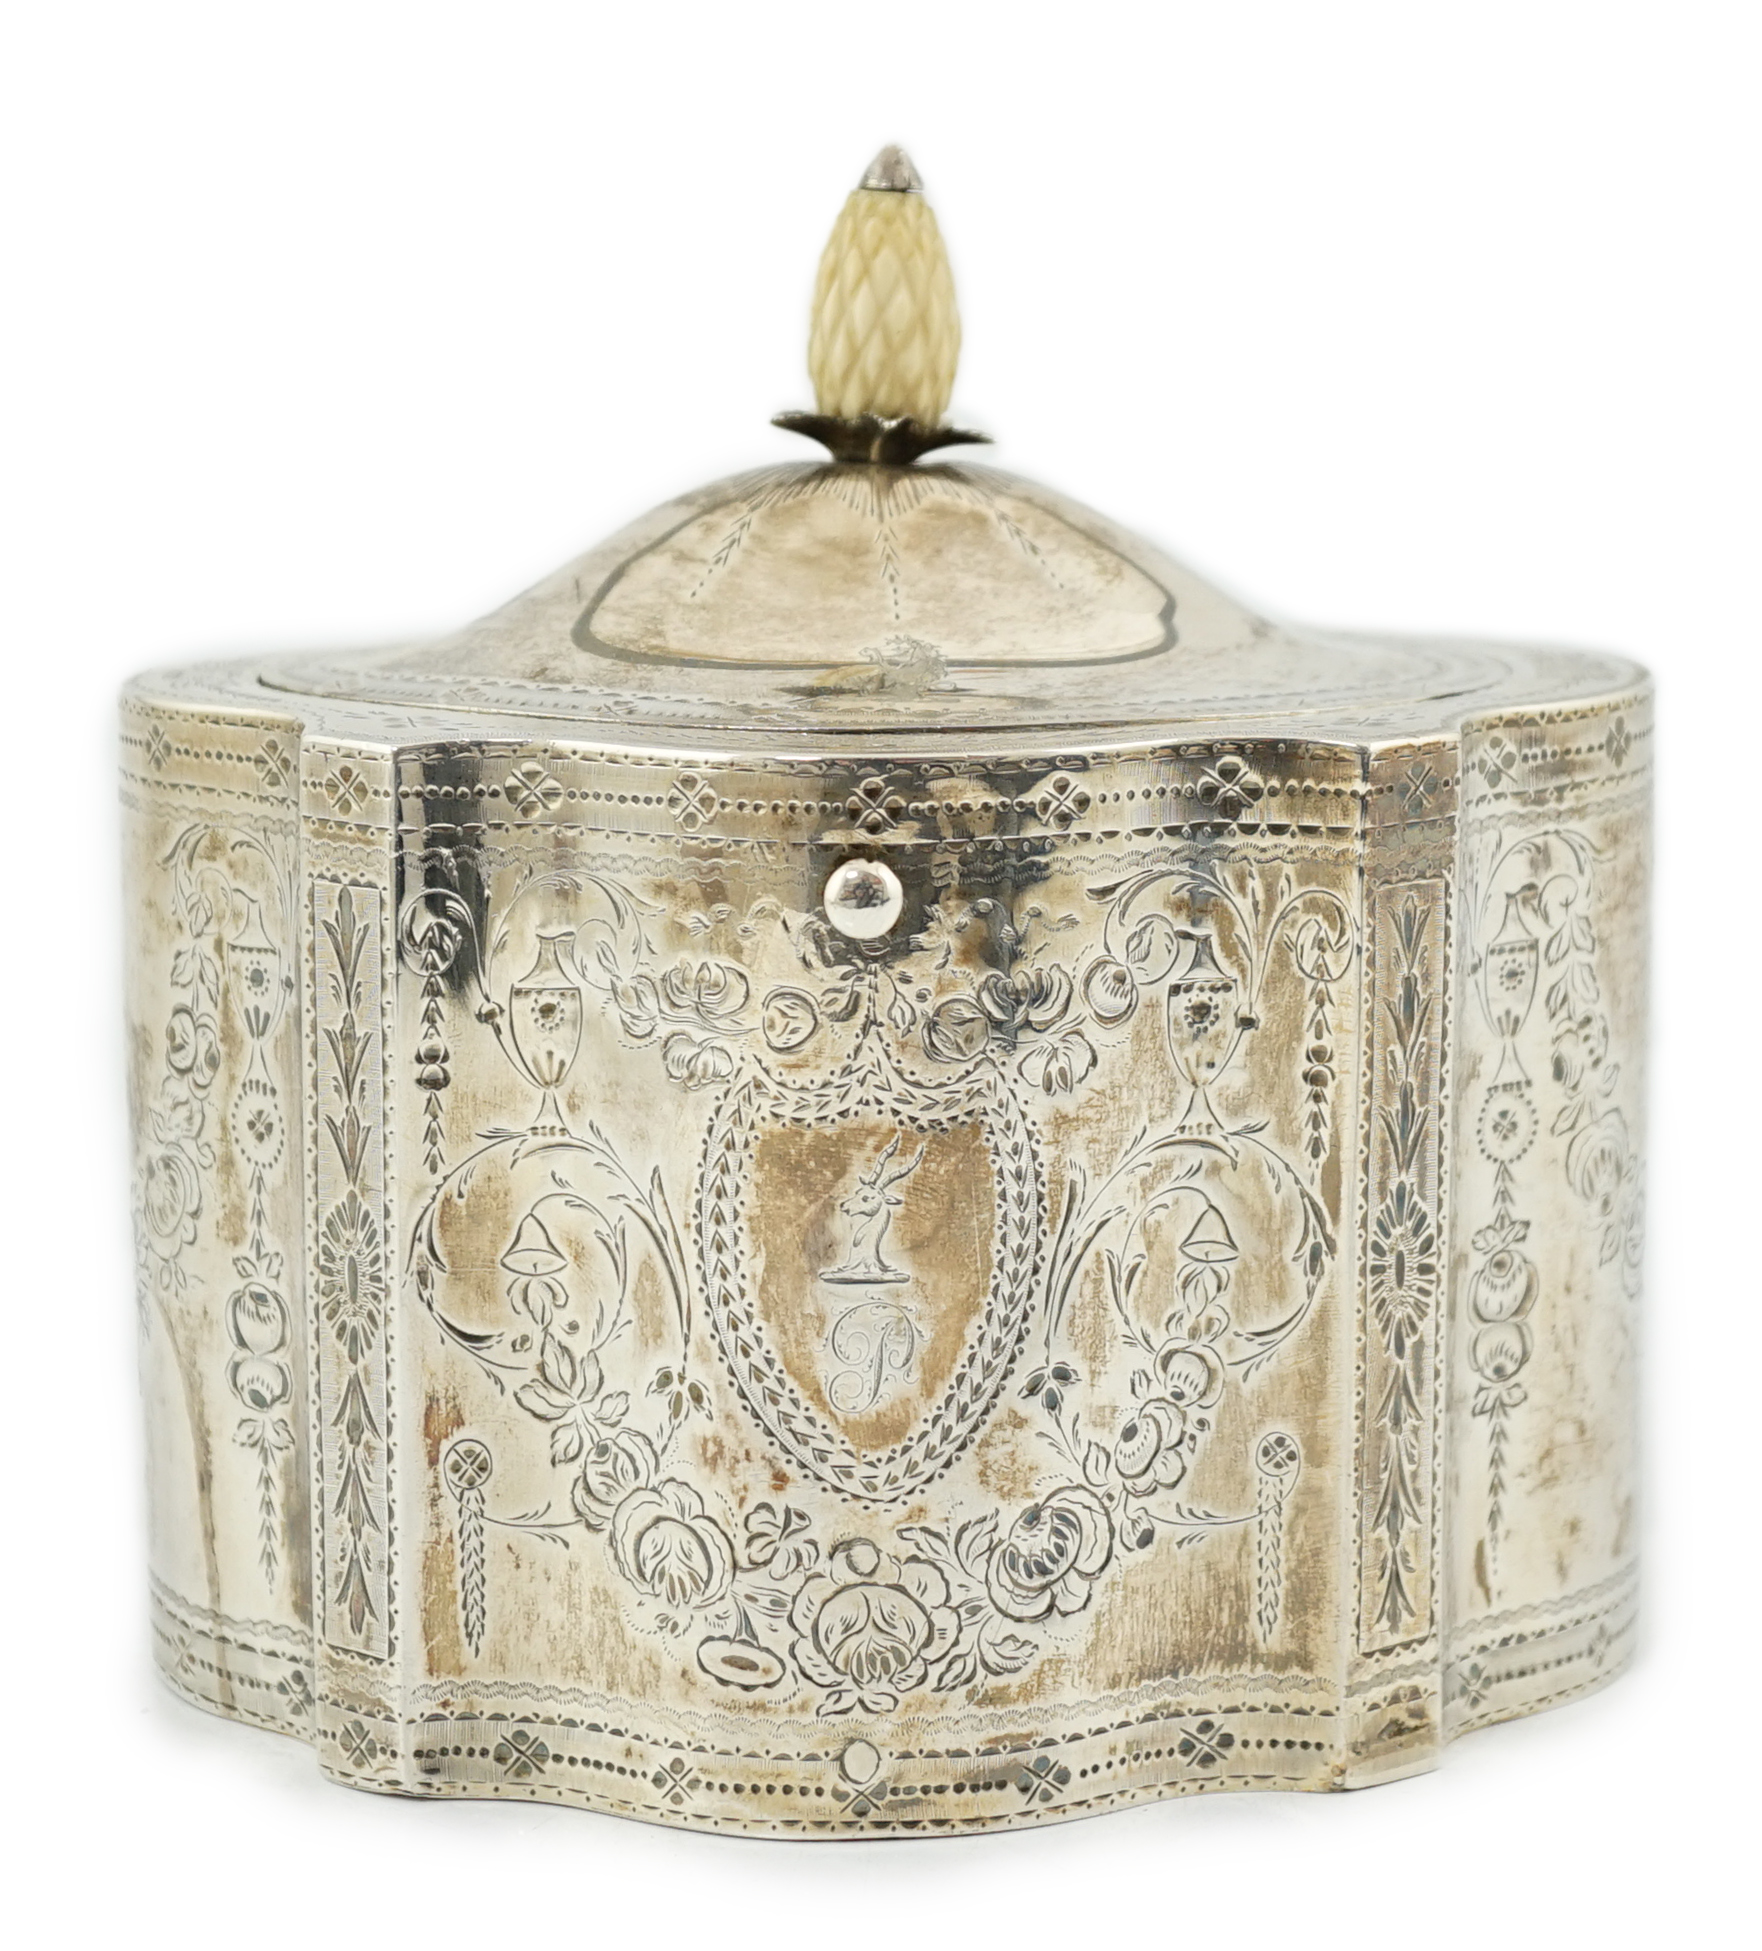 A George III engraved silver tea caddy, by Benjamin Mountigue, CITES submission reference:PEP4M192